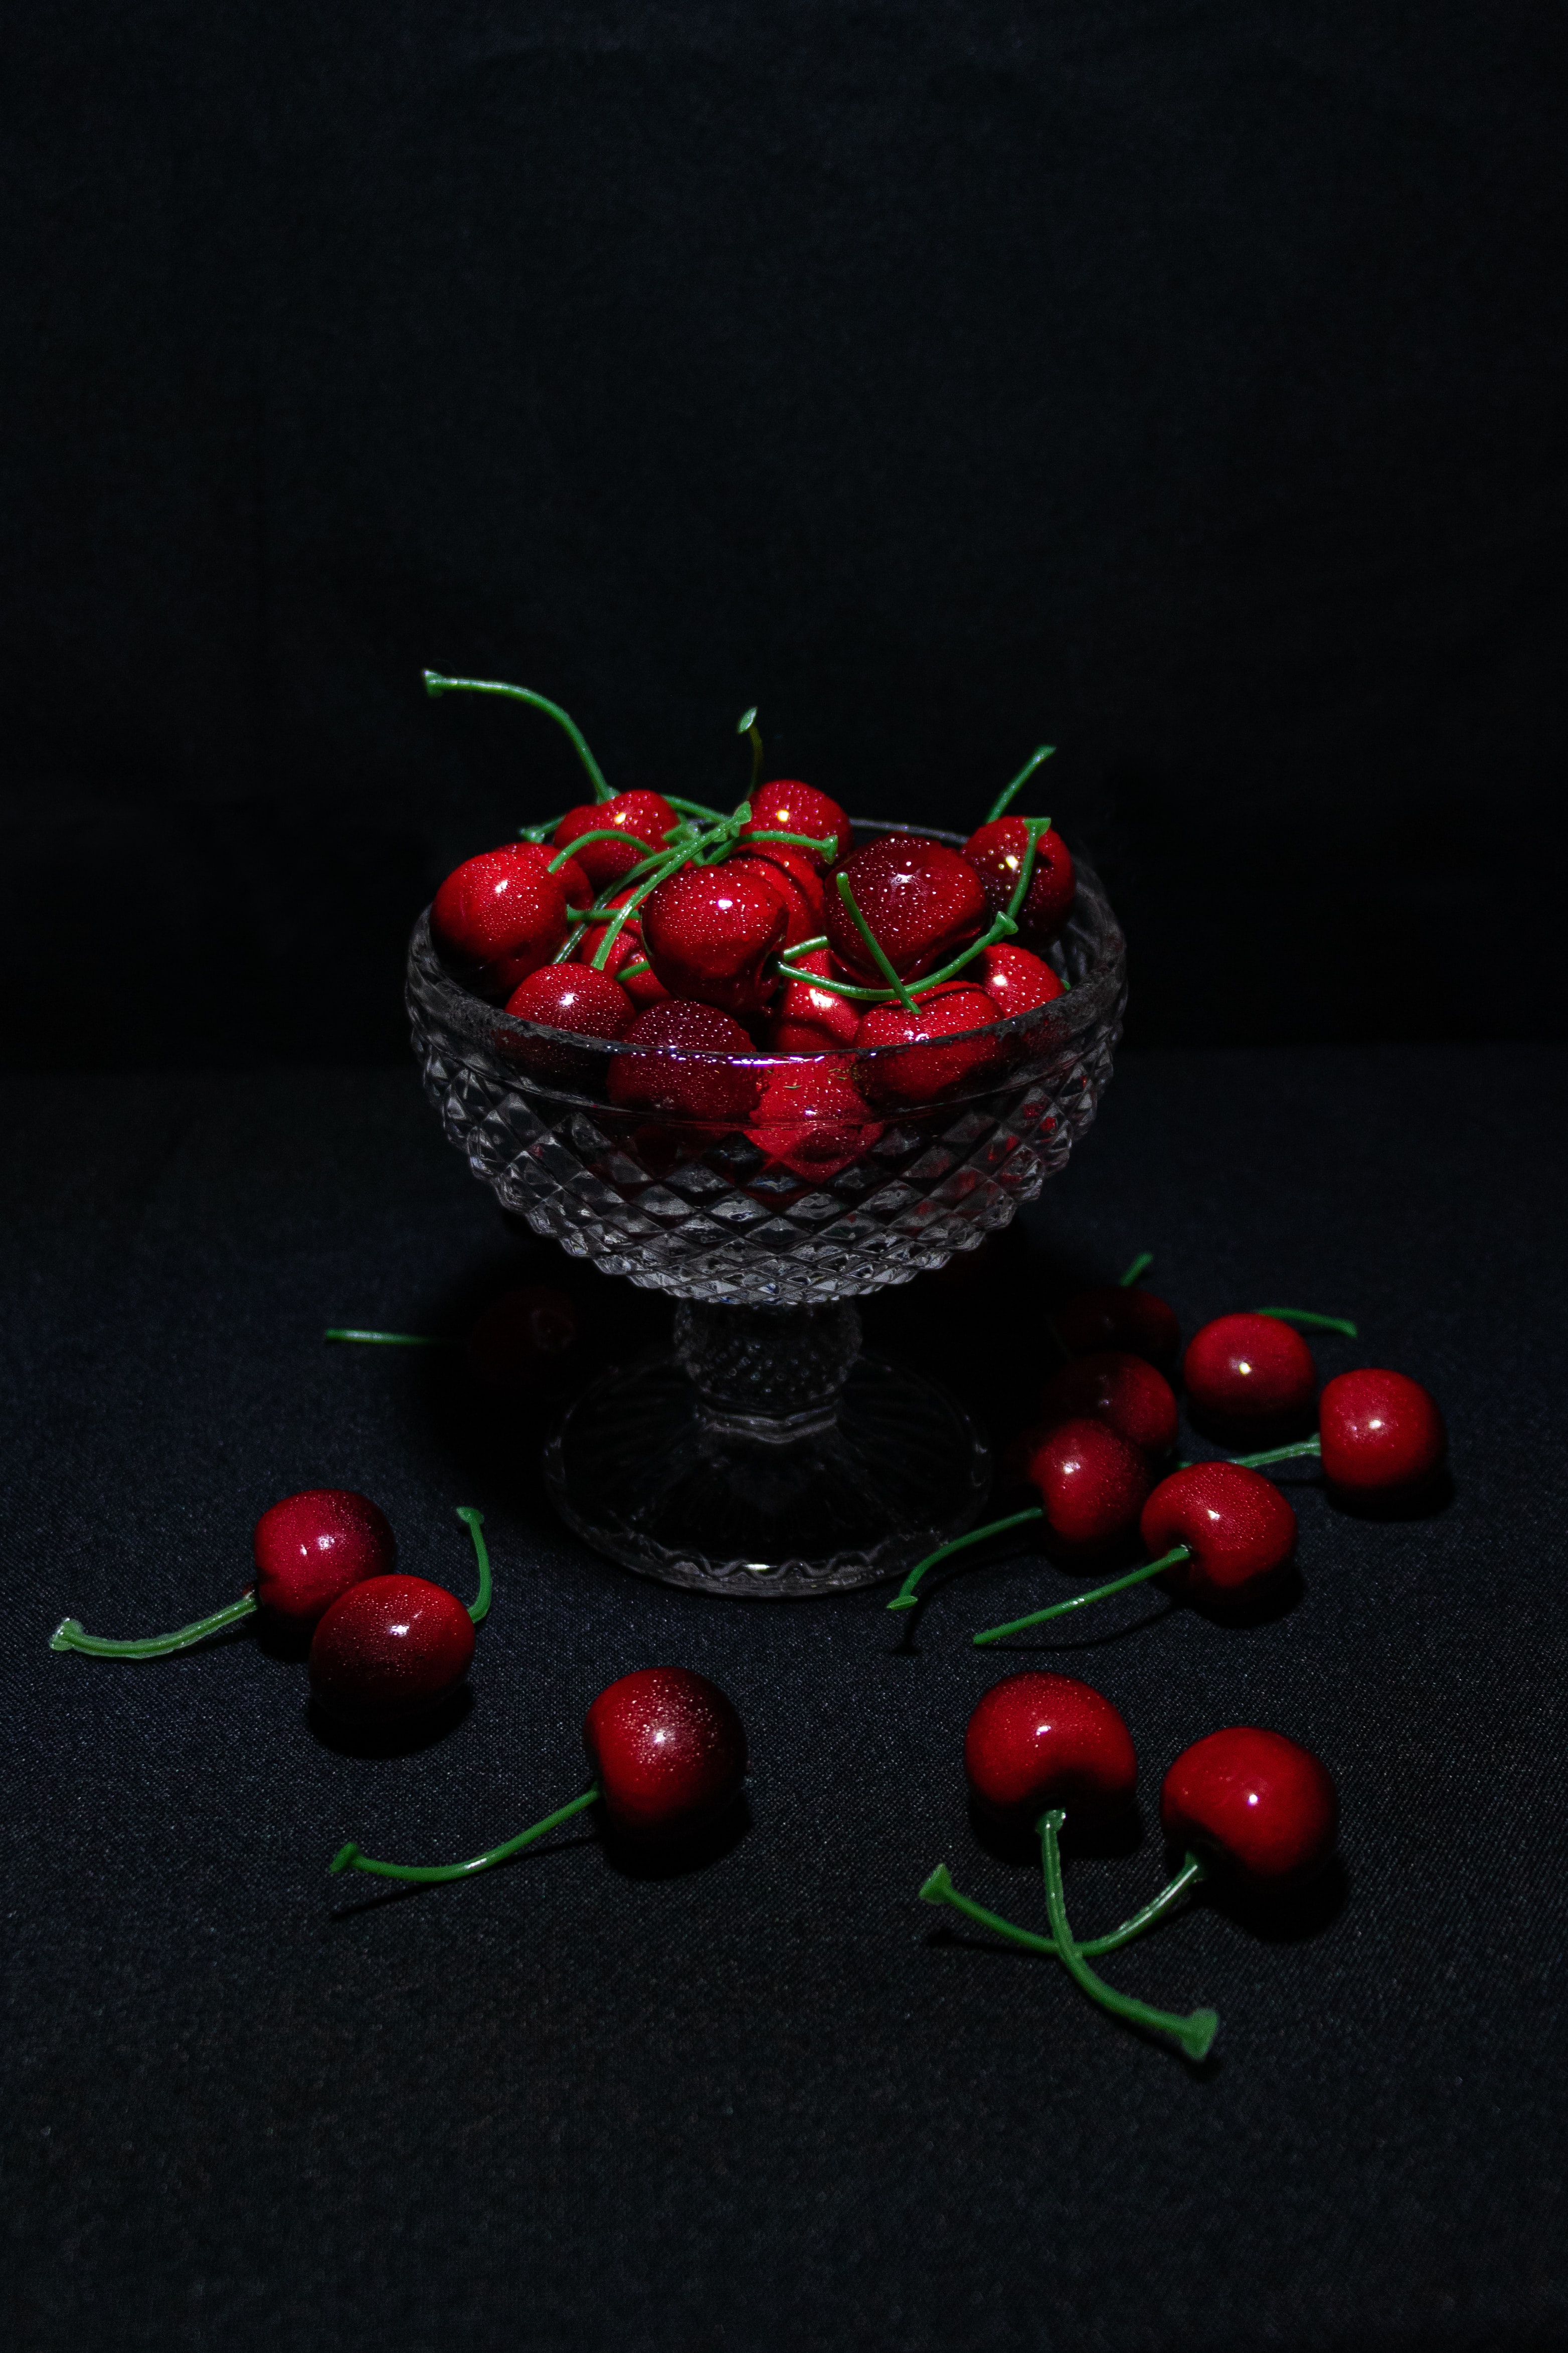 fruits, sweet cherry, food, cherry, drops, wet, berry